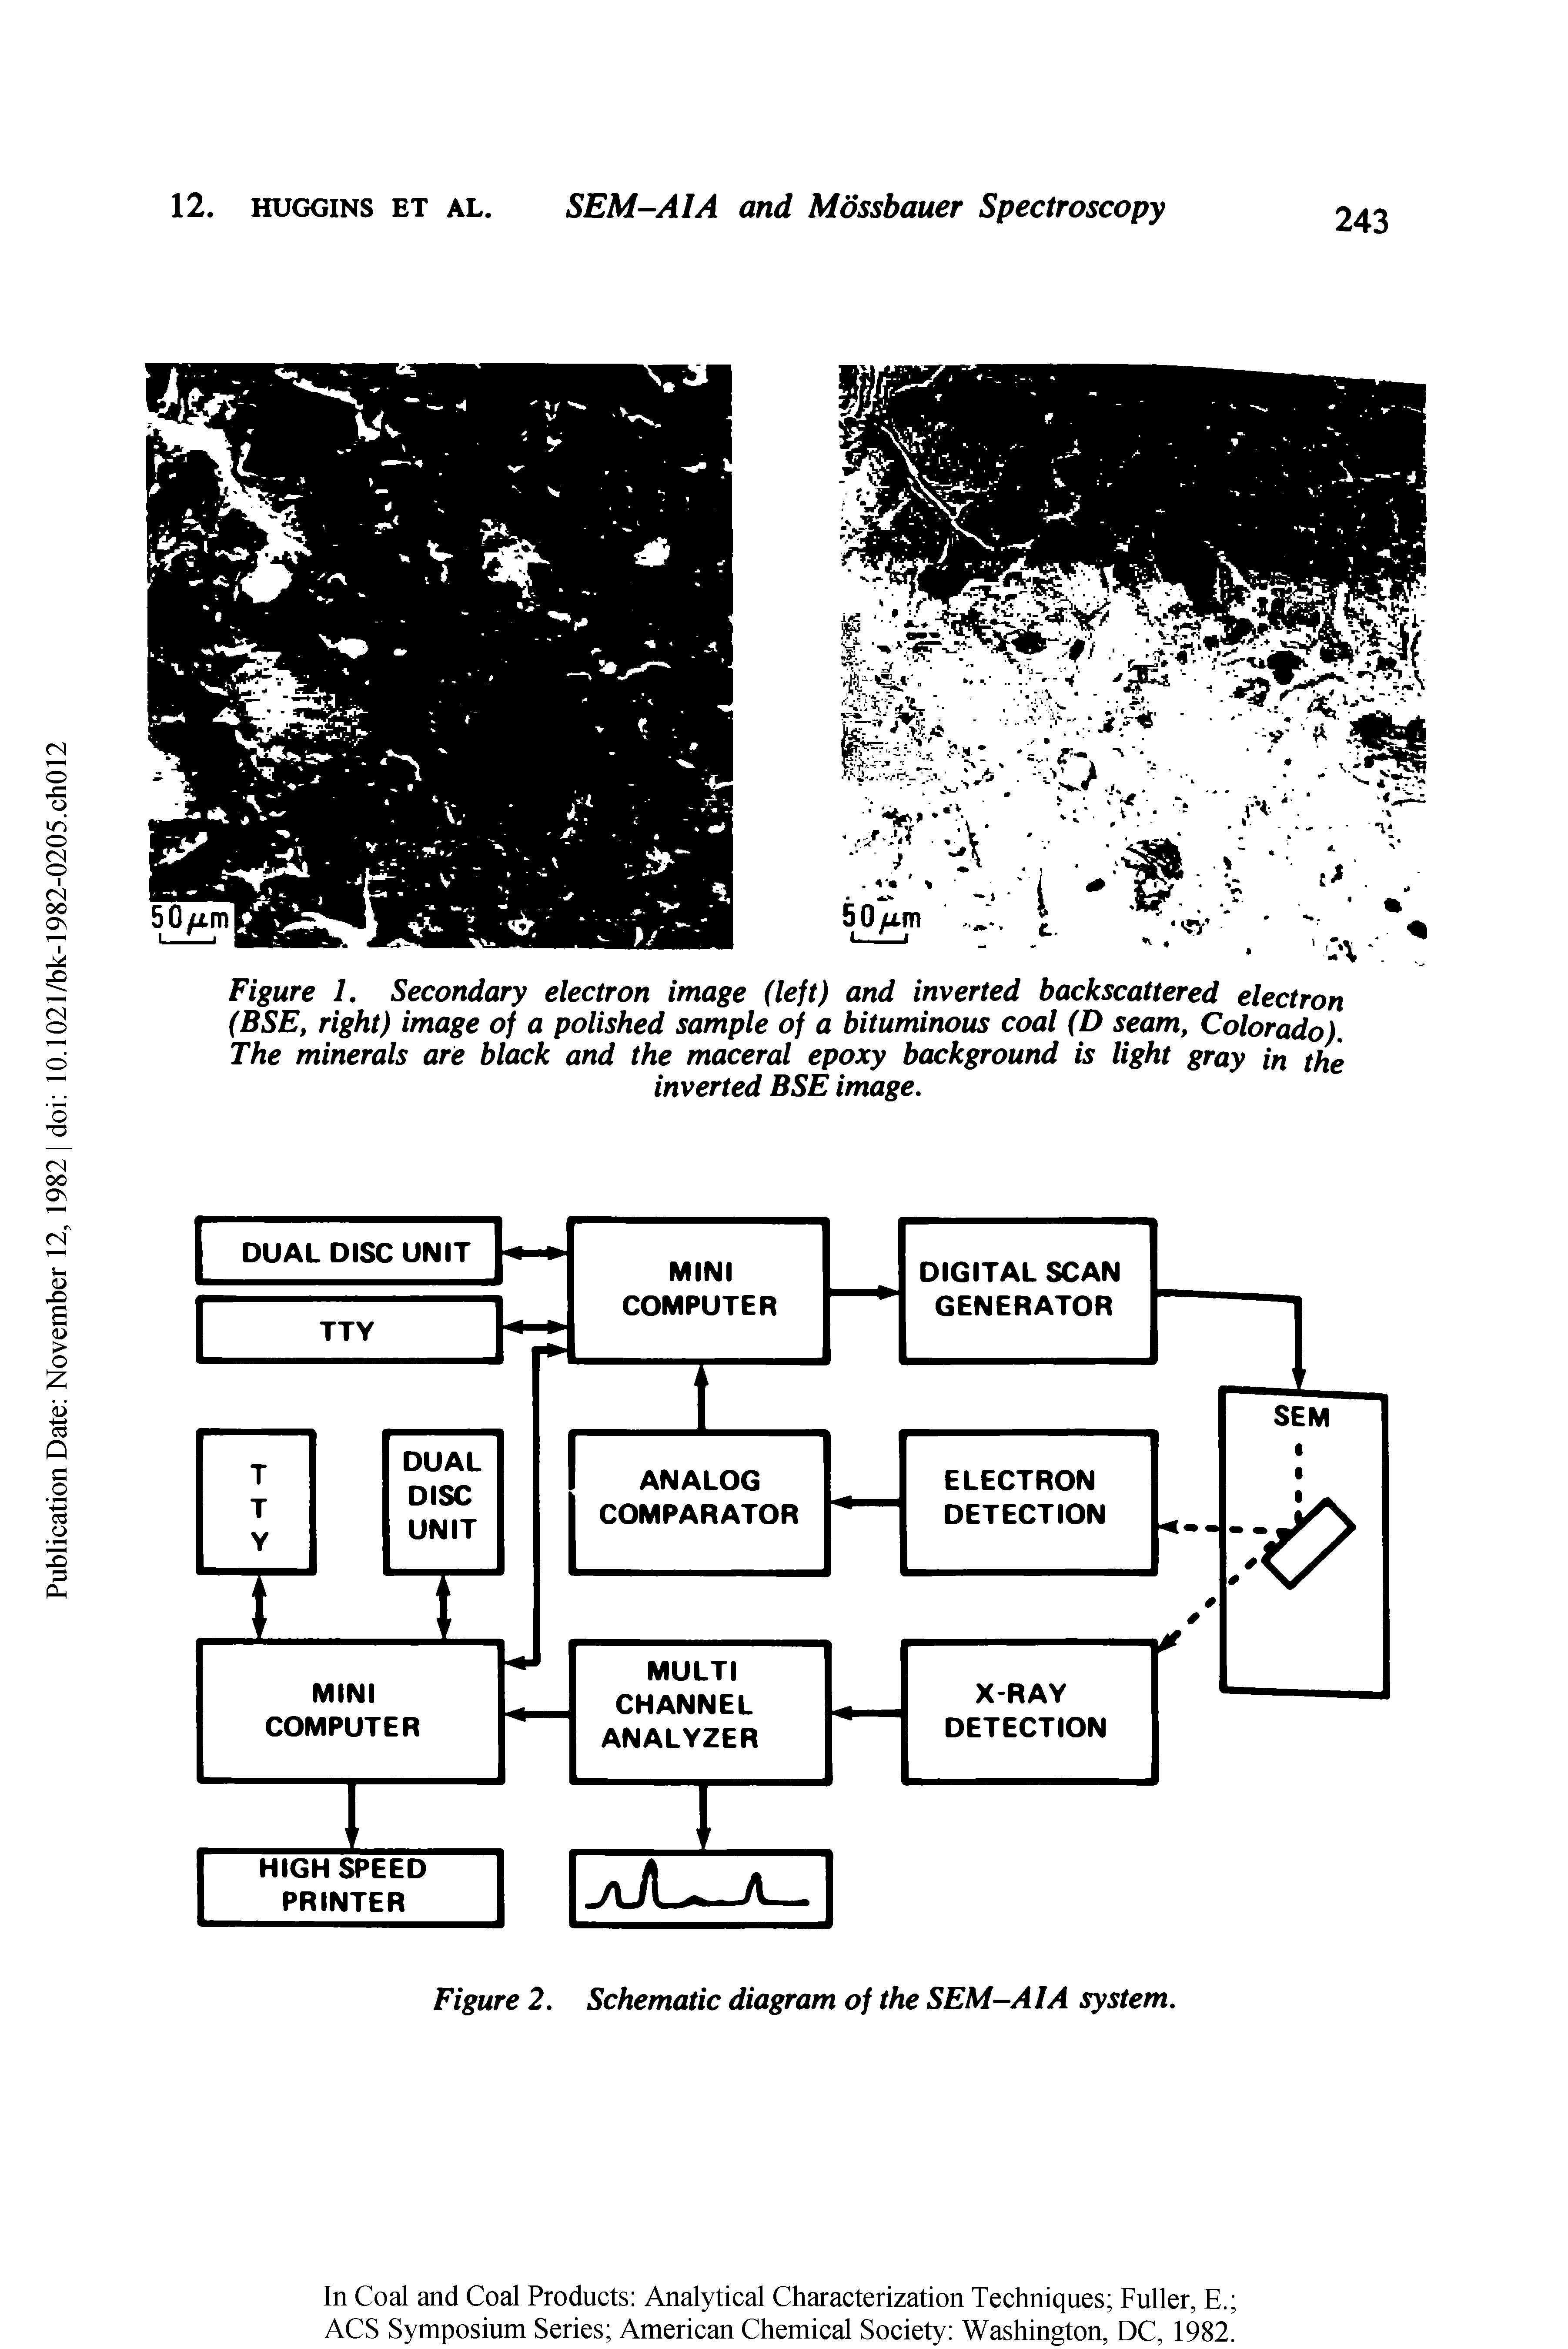 Figure 1, Secondary electron image (left) and inverted backscattered electron (BSE, right) image of a polished sample of a bituminous coal (D seam, Colorado), The minerals are black and the maceral epoxy background is light gray in the...